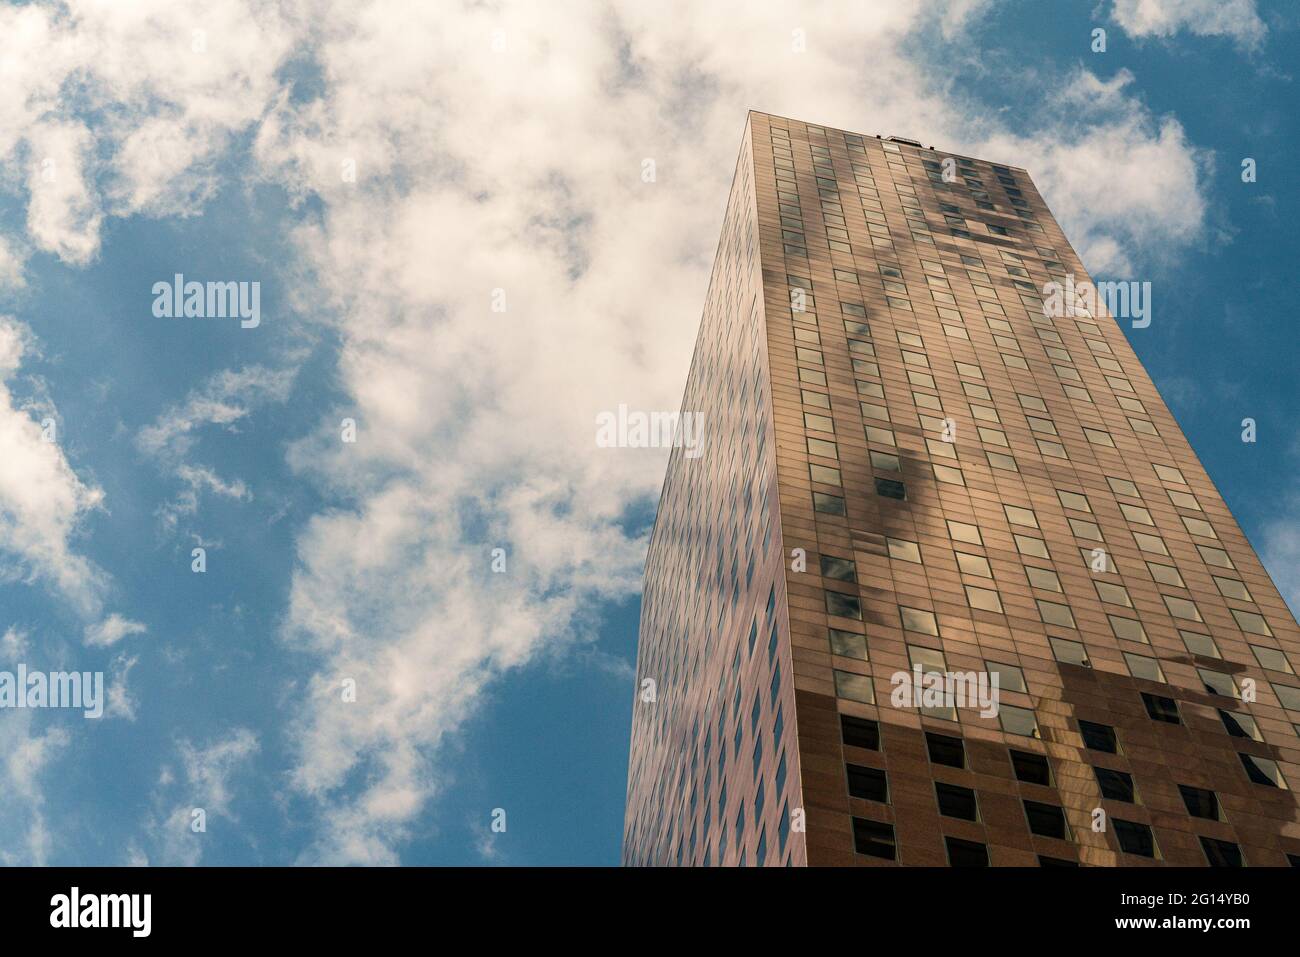 Images of the variation of buildings made by Mary Catherine Messner in New York City, New York Stock Photo